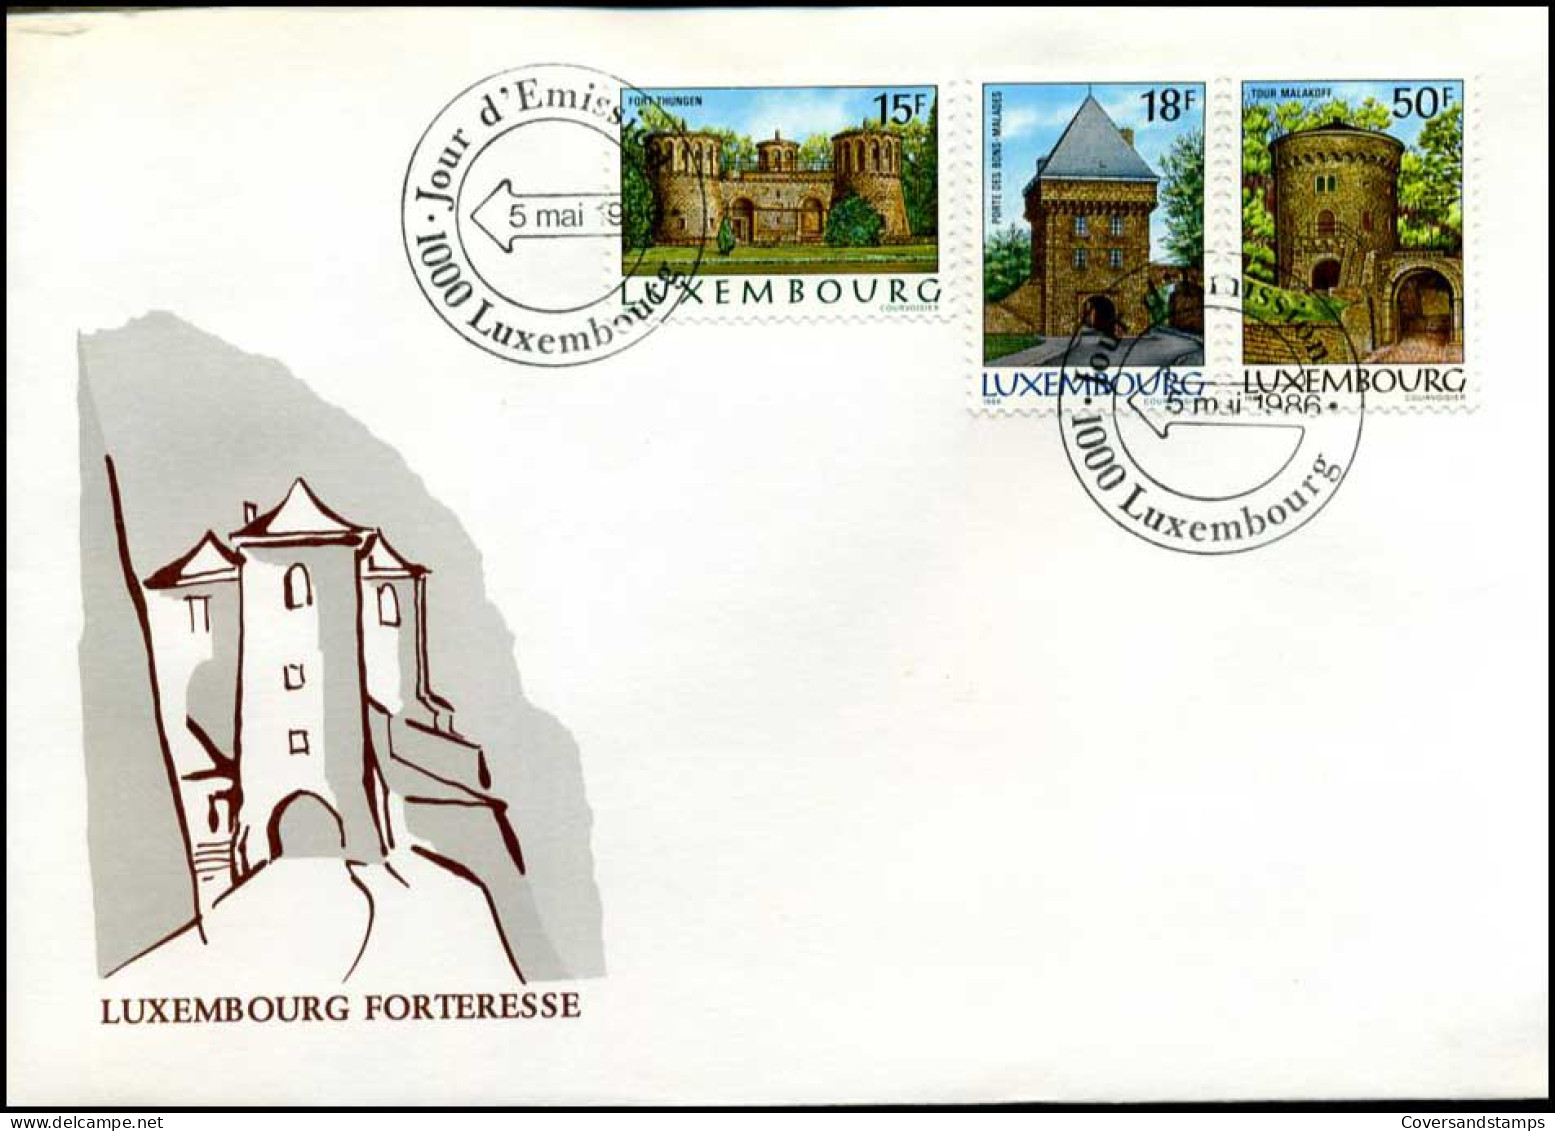 Luxembourg - FDC -Luxembourg Forteresse - FDC